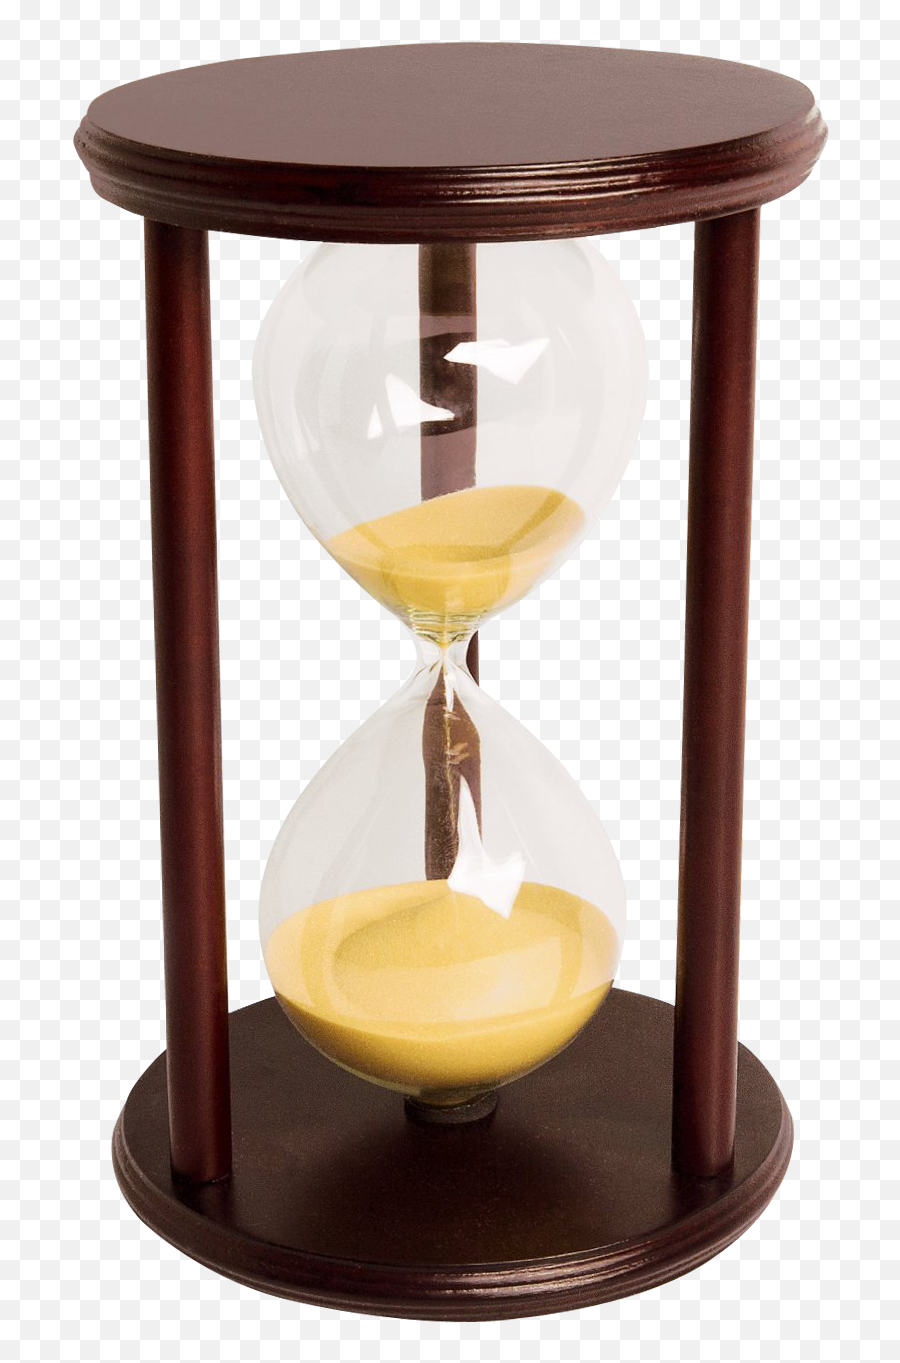 Png Transparent Hourglass - Hourglass Png,Hourglass Transparent Background